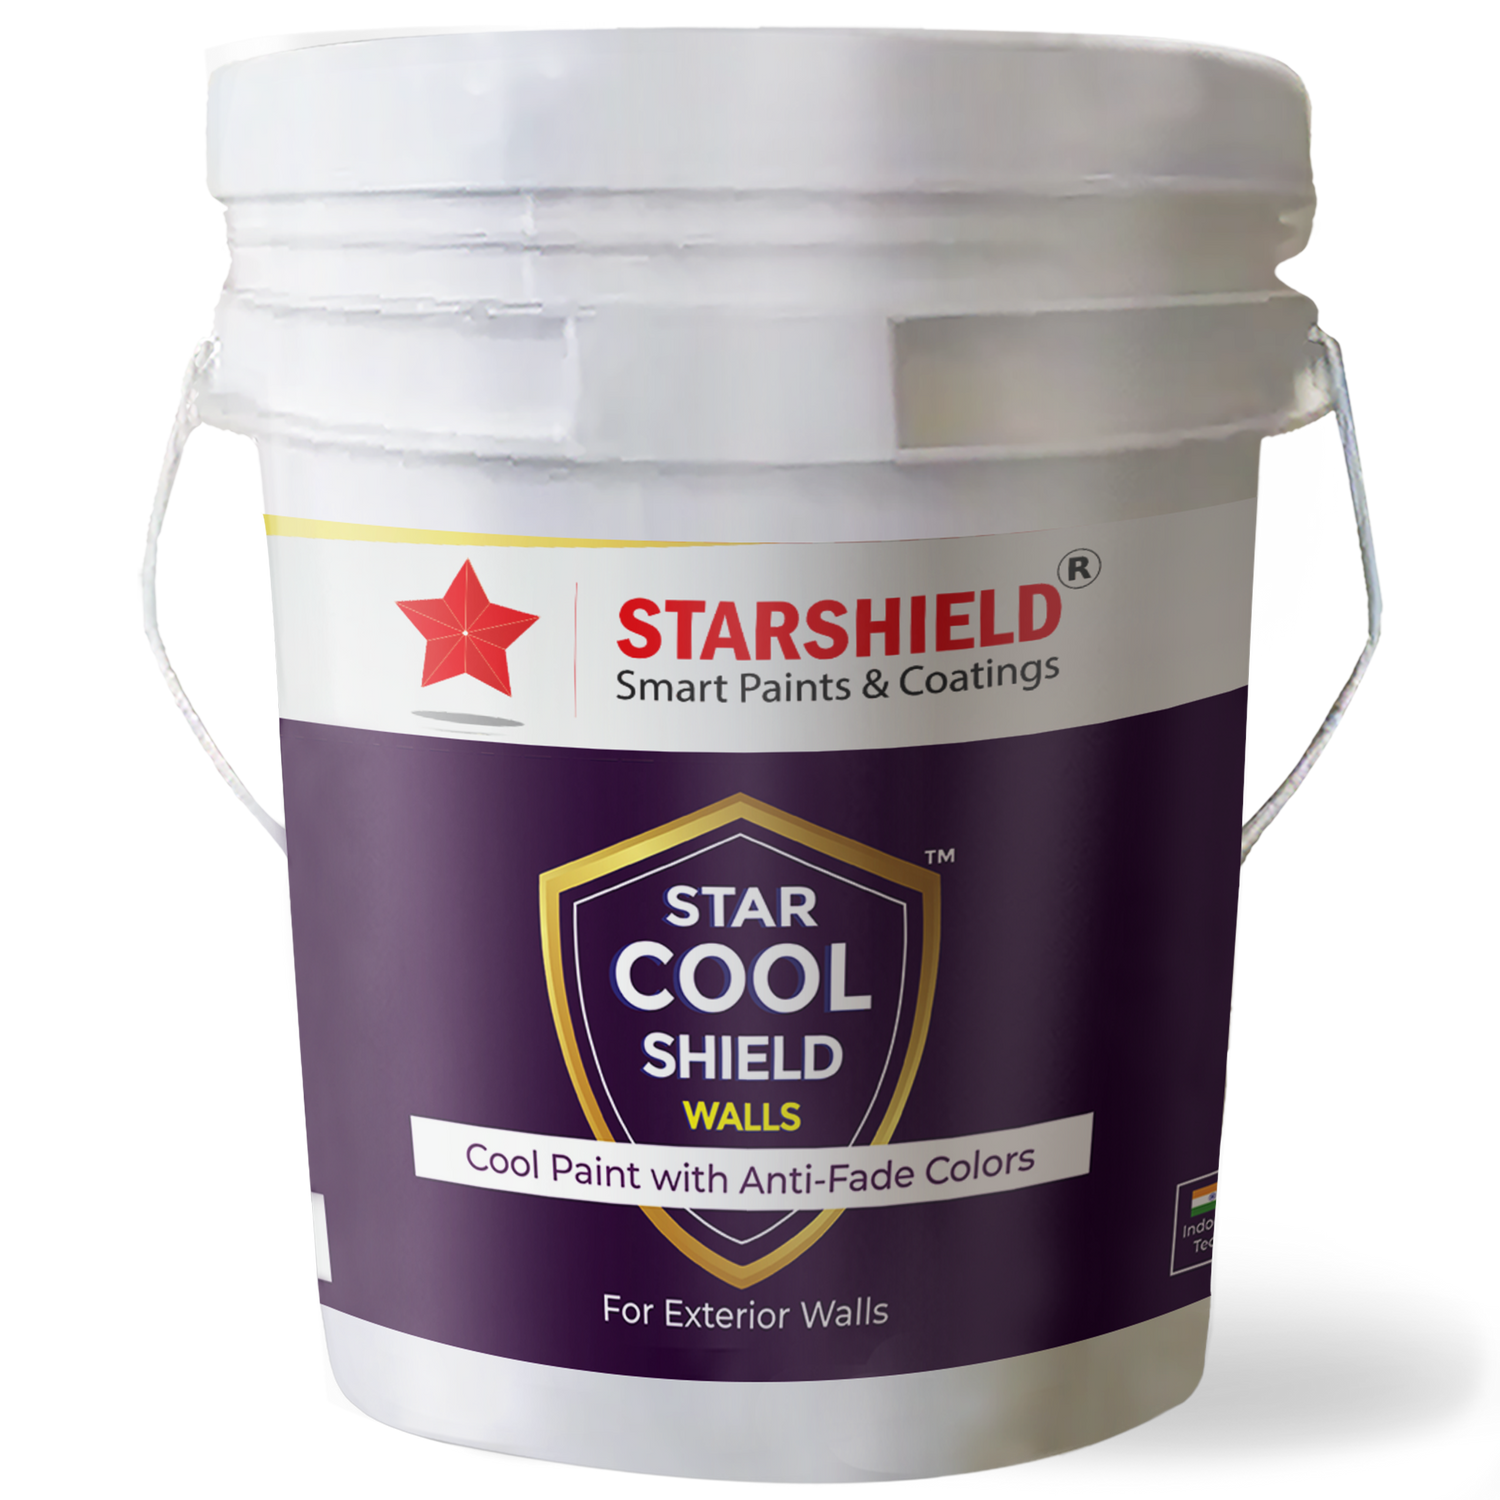 Elevate your walls with Star Cool Shield's High Albedo Paint. Thermal Insulation, Roof Heat Solutions.